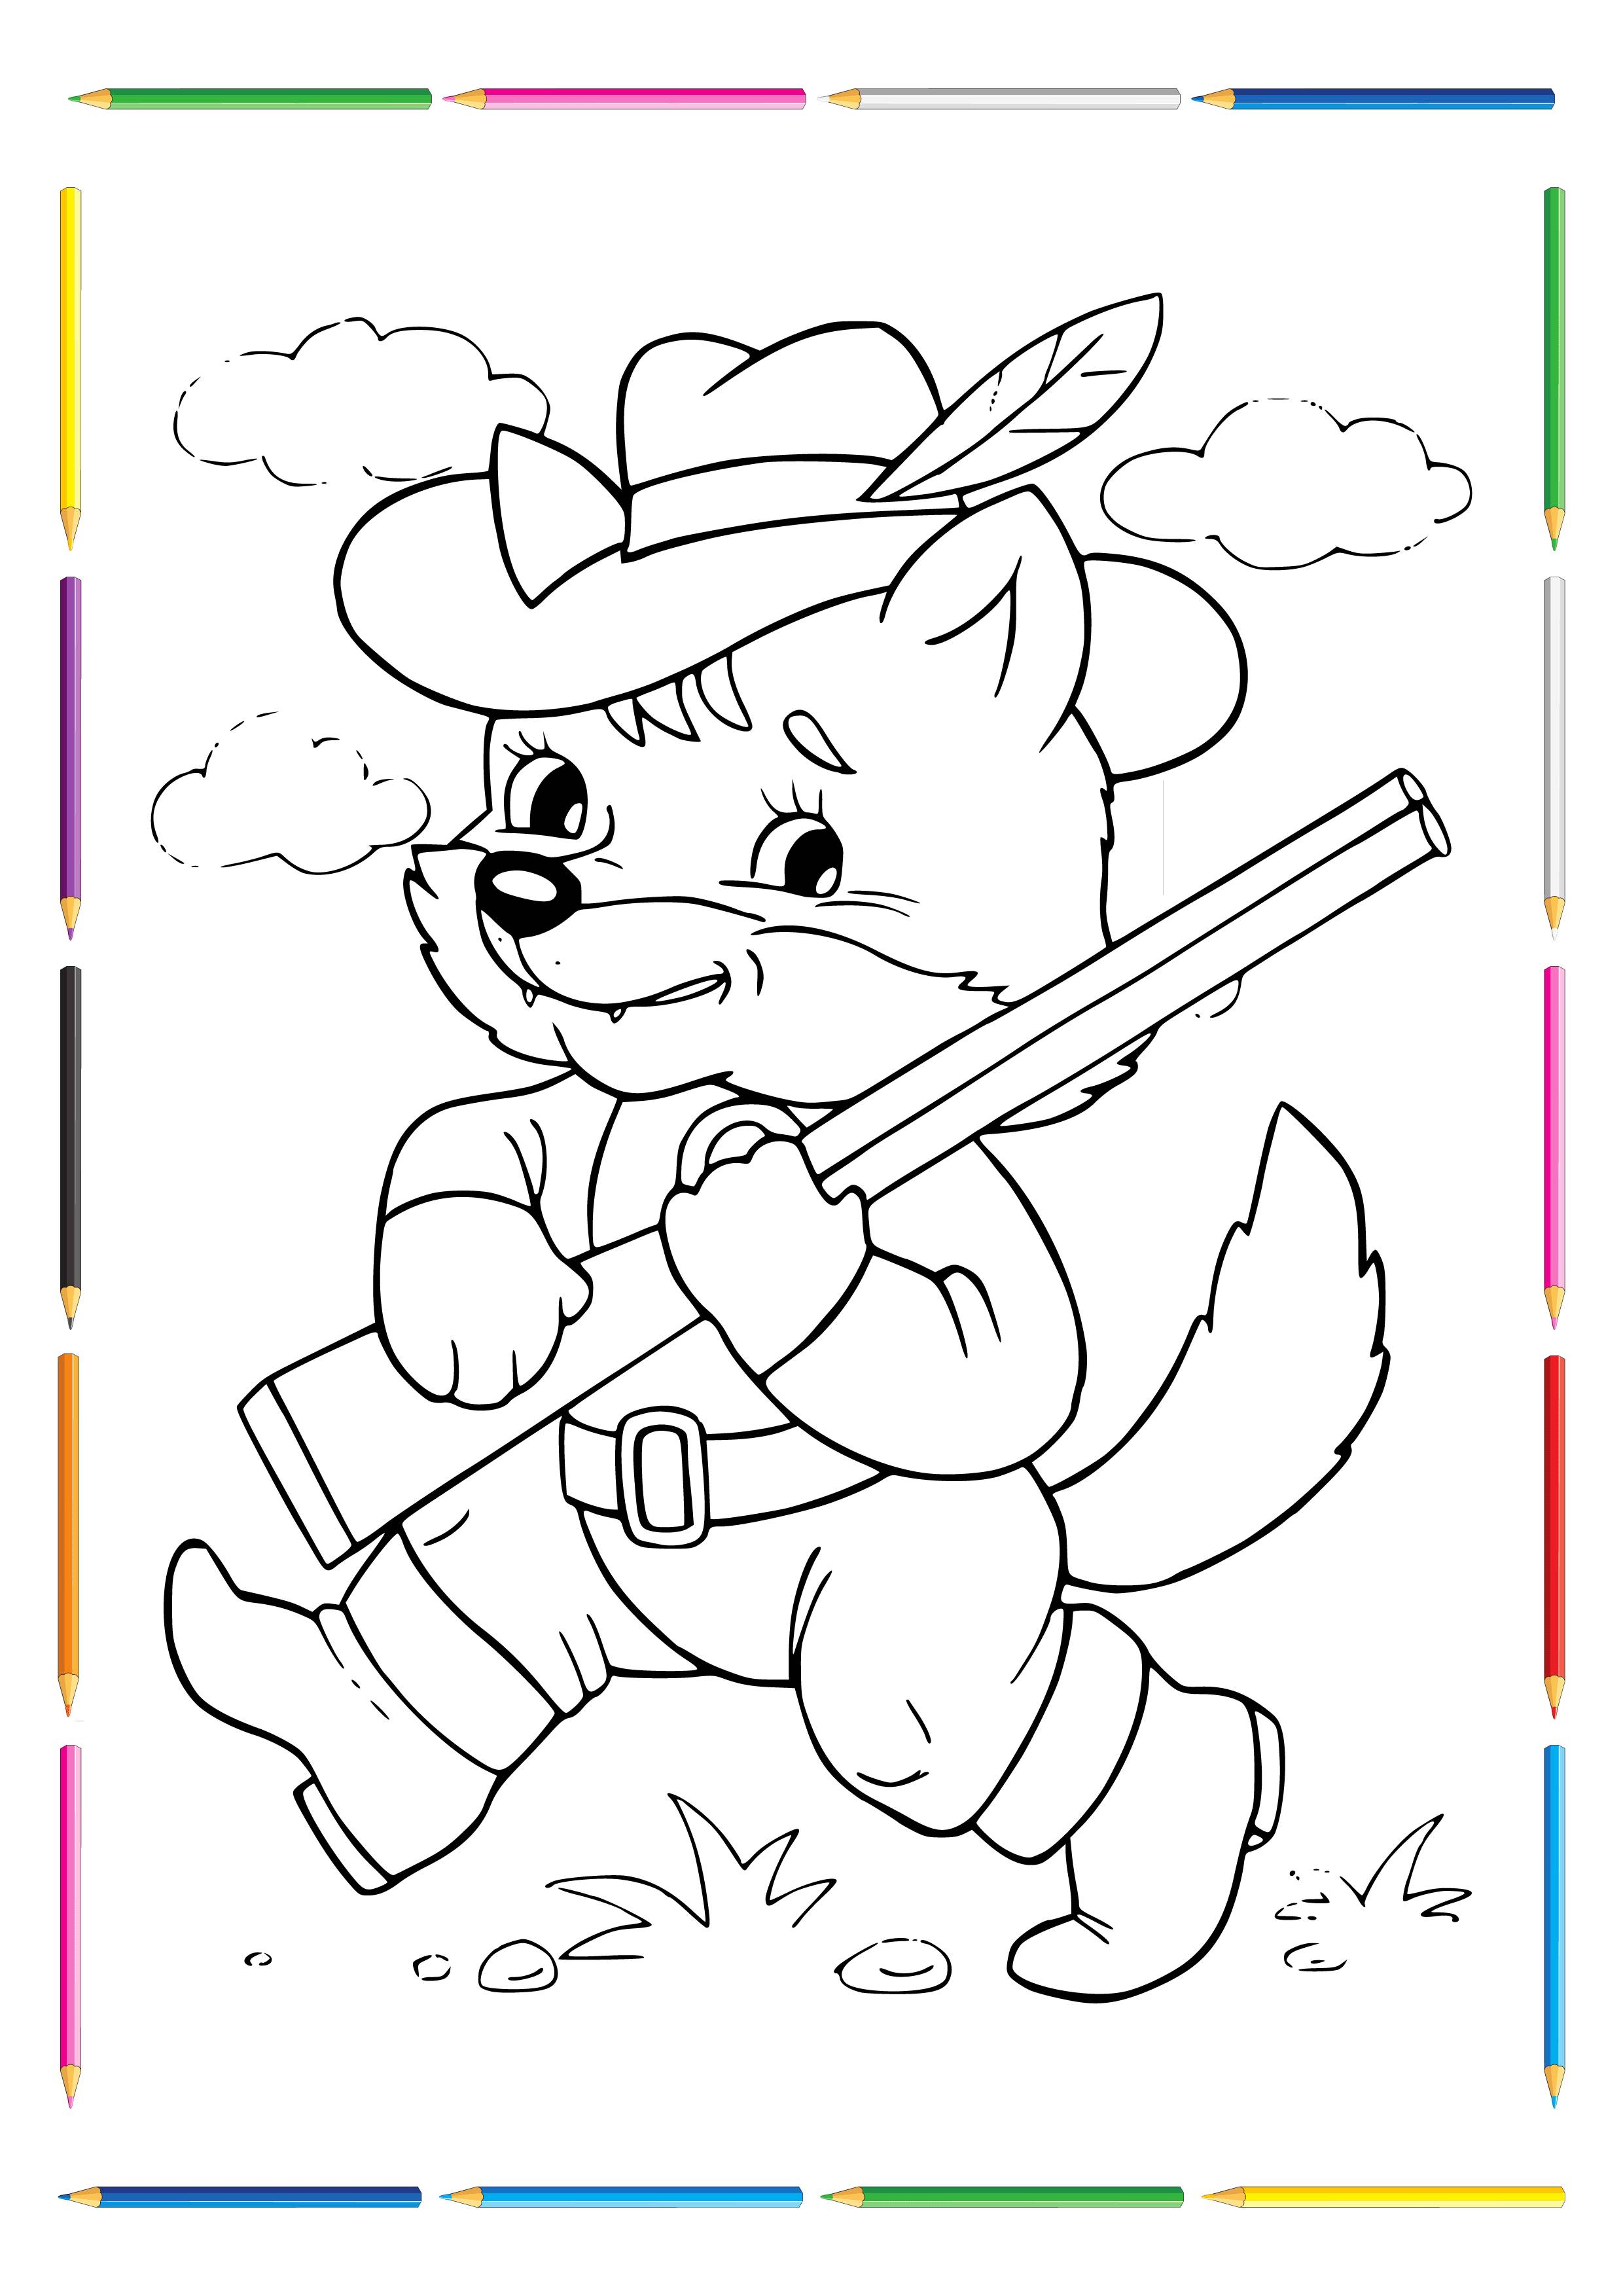 Colorful coloring book for children